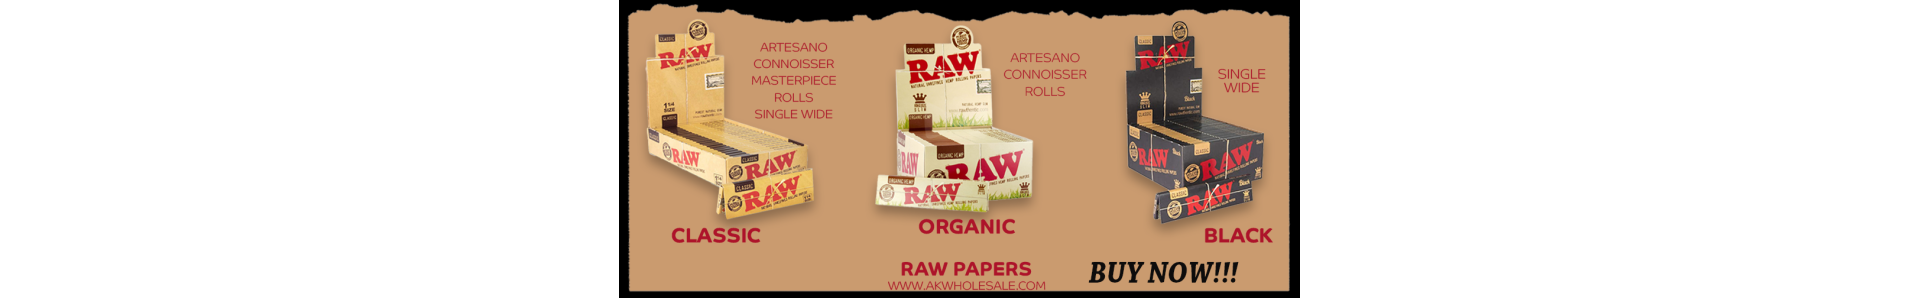 RAW PRODUCTS